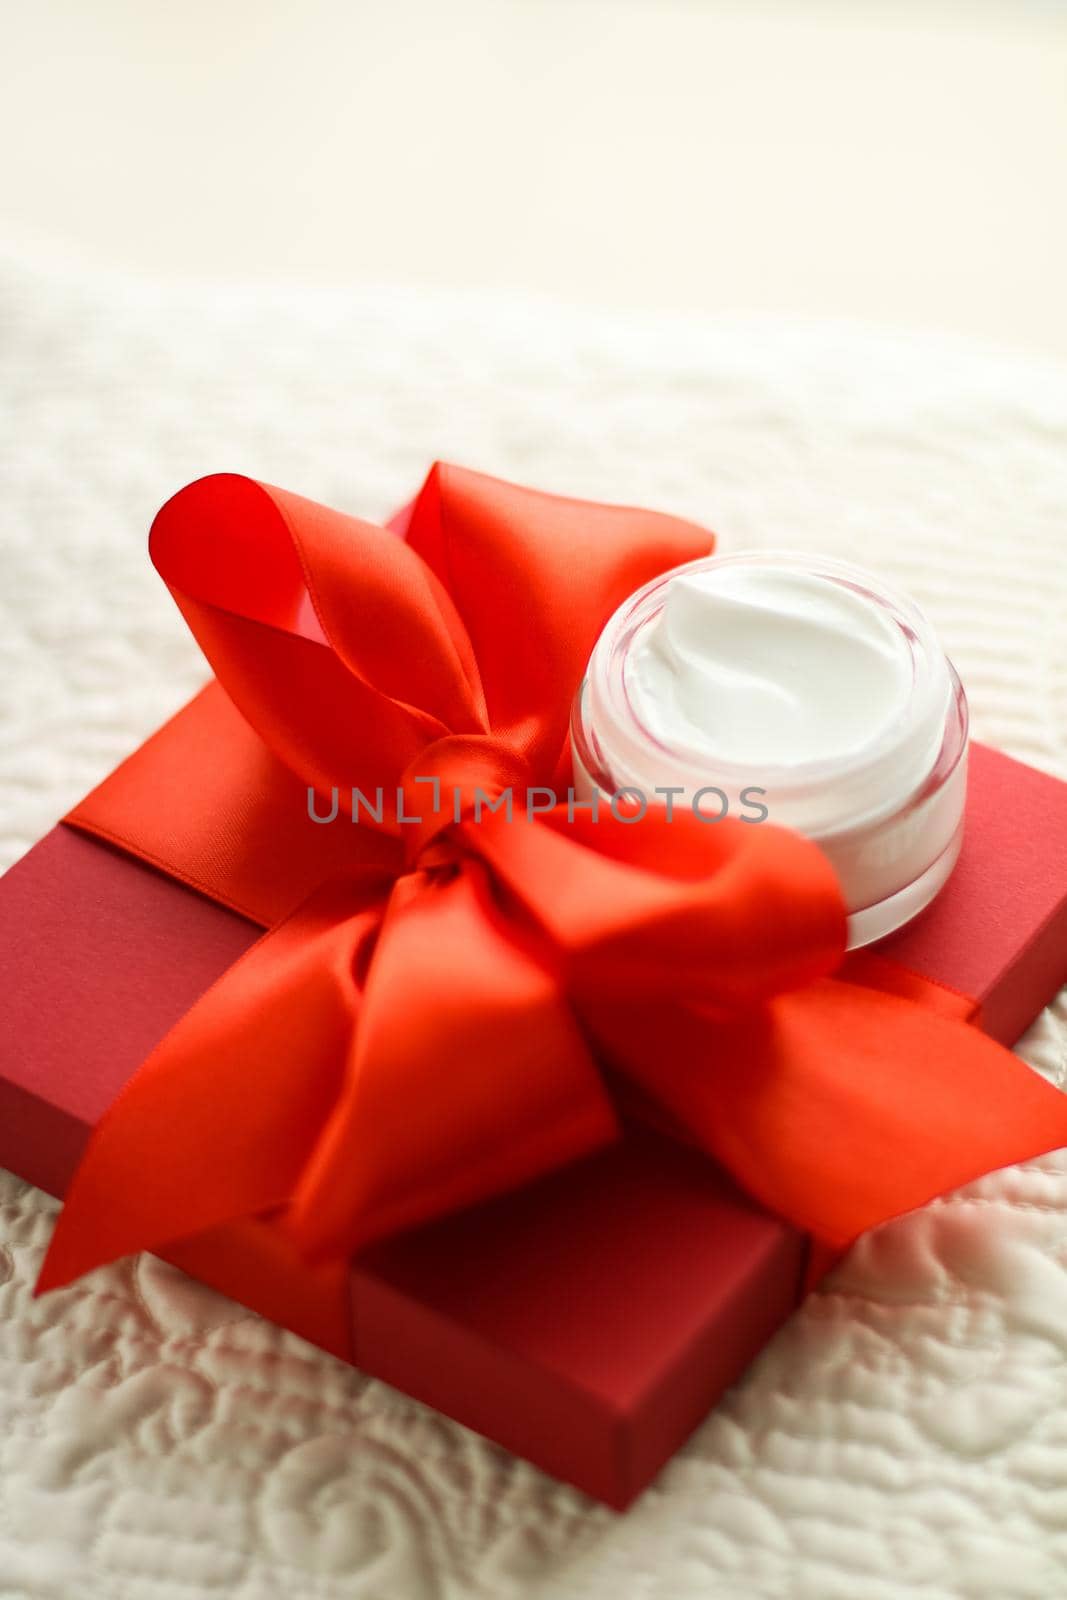 Luxury face cream jar and red gift box by Anneleven